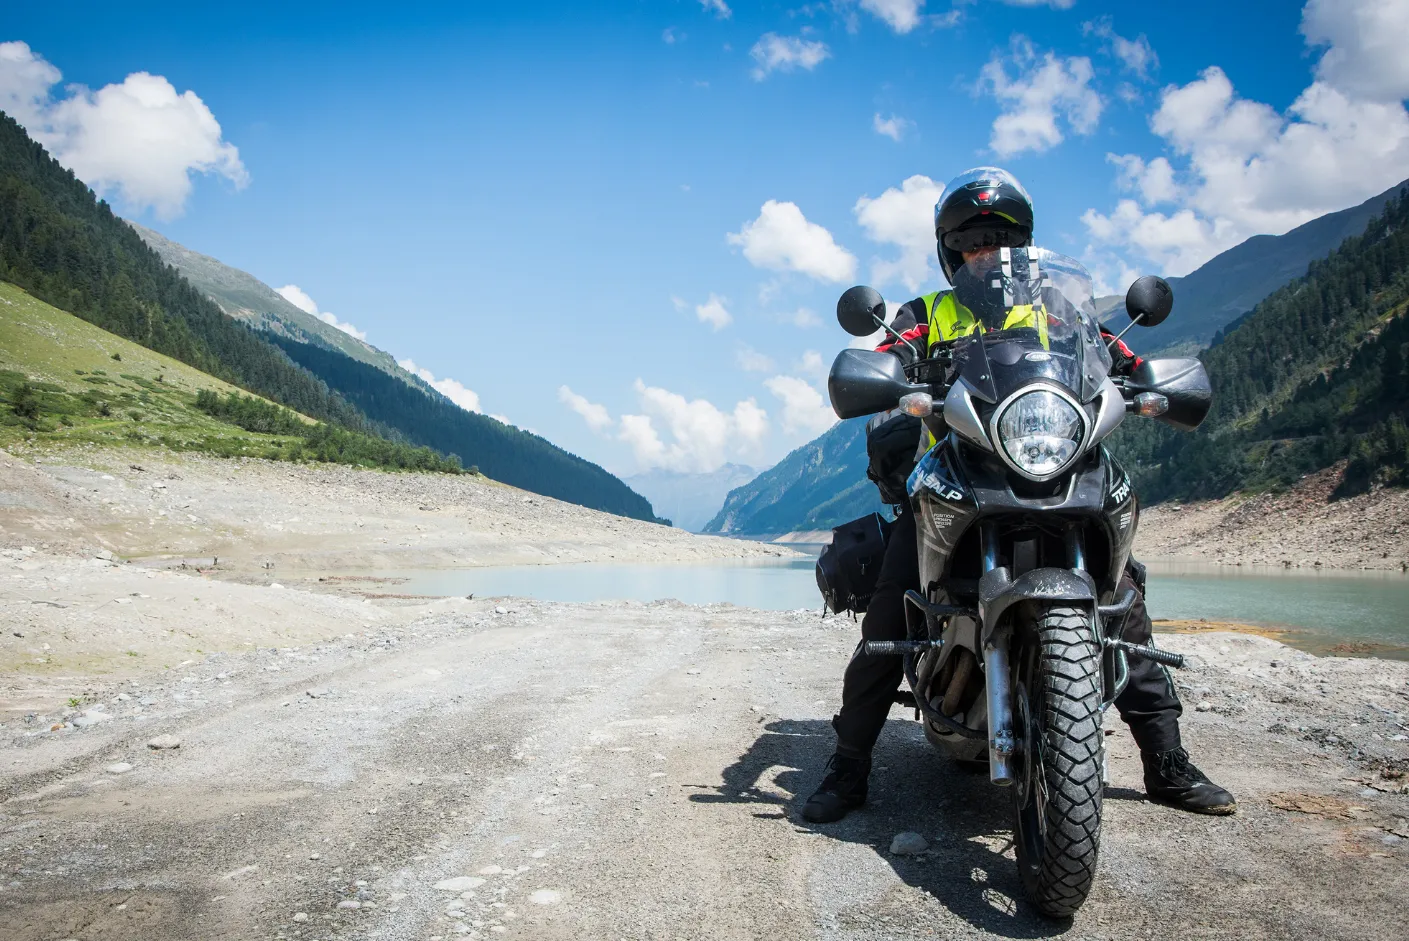 Get to know about the DMV motorcycle test in detail